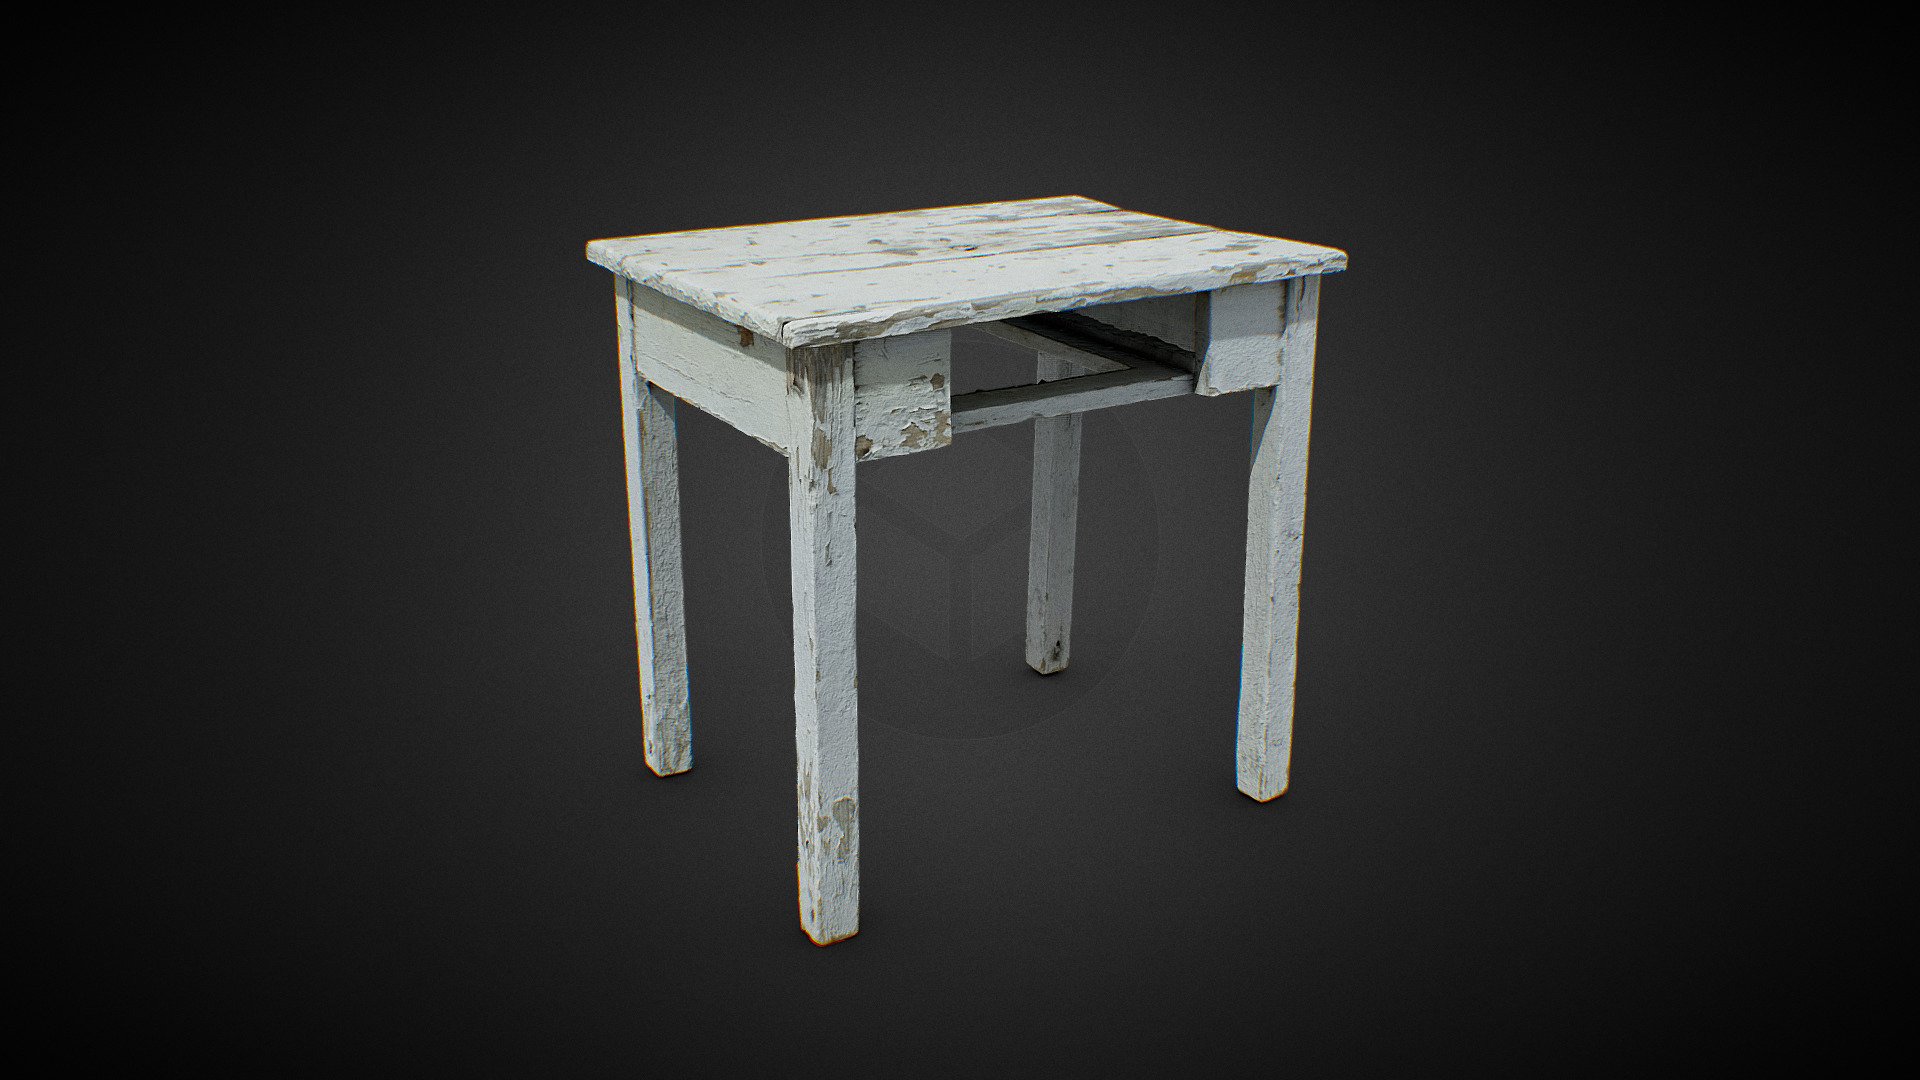 Photogrammetry Table Wood 3D Scan
4 Textures - Table Wood 3D Scan - Buy Royalty Free 3D model by grafi (@zdenkoroman) 3d model